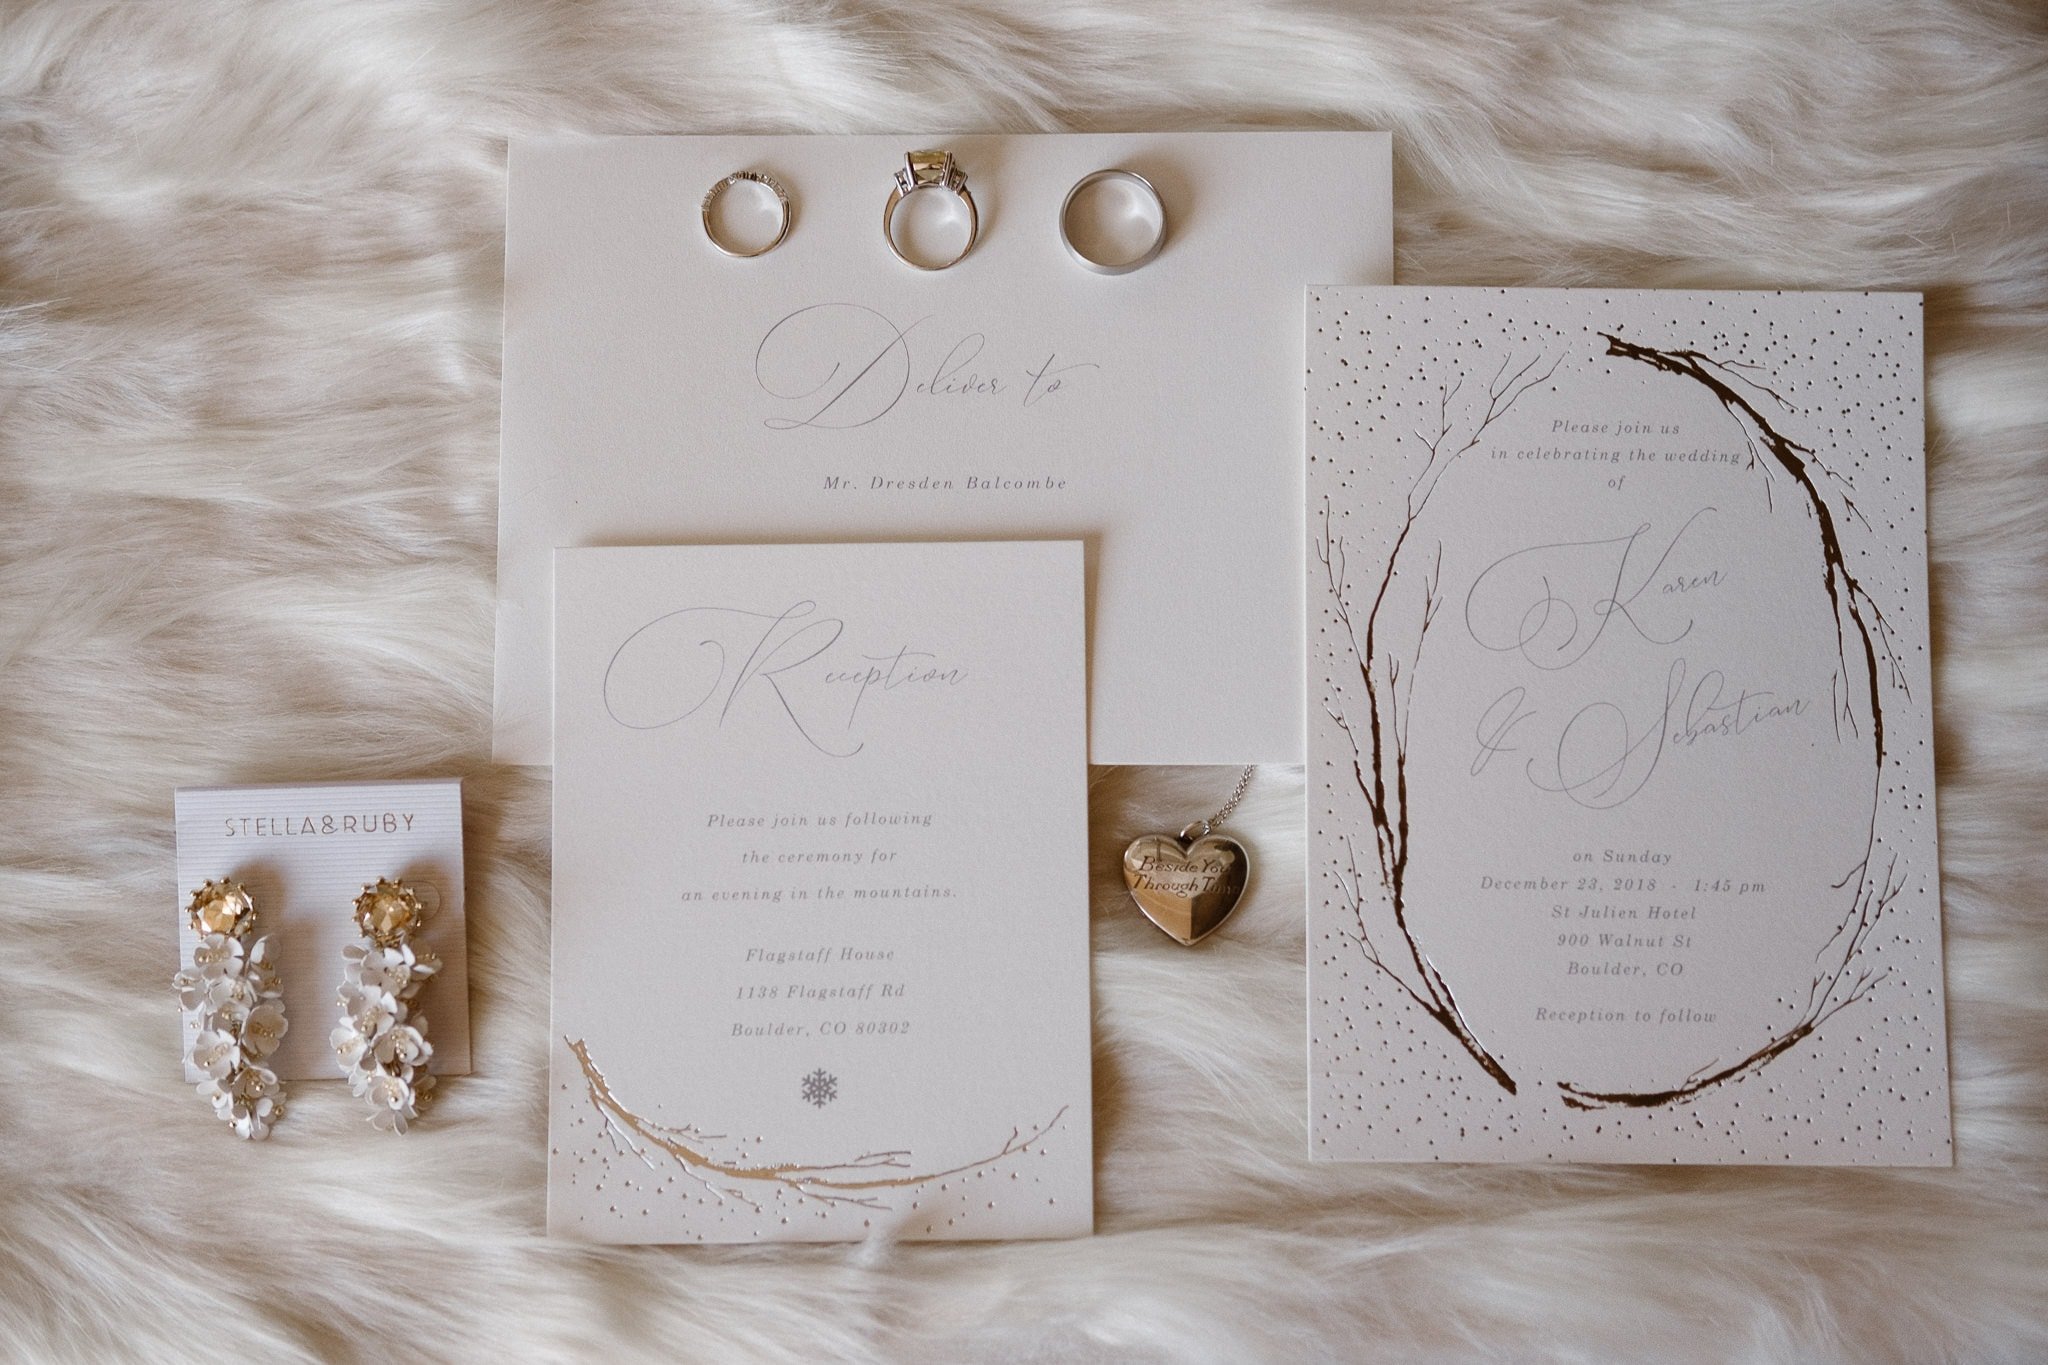 Elegant white and silver wedding invitations and jewelry on fur